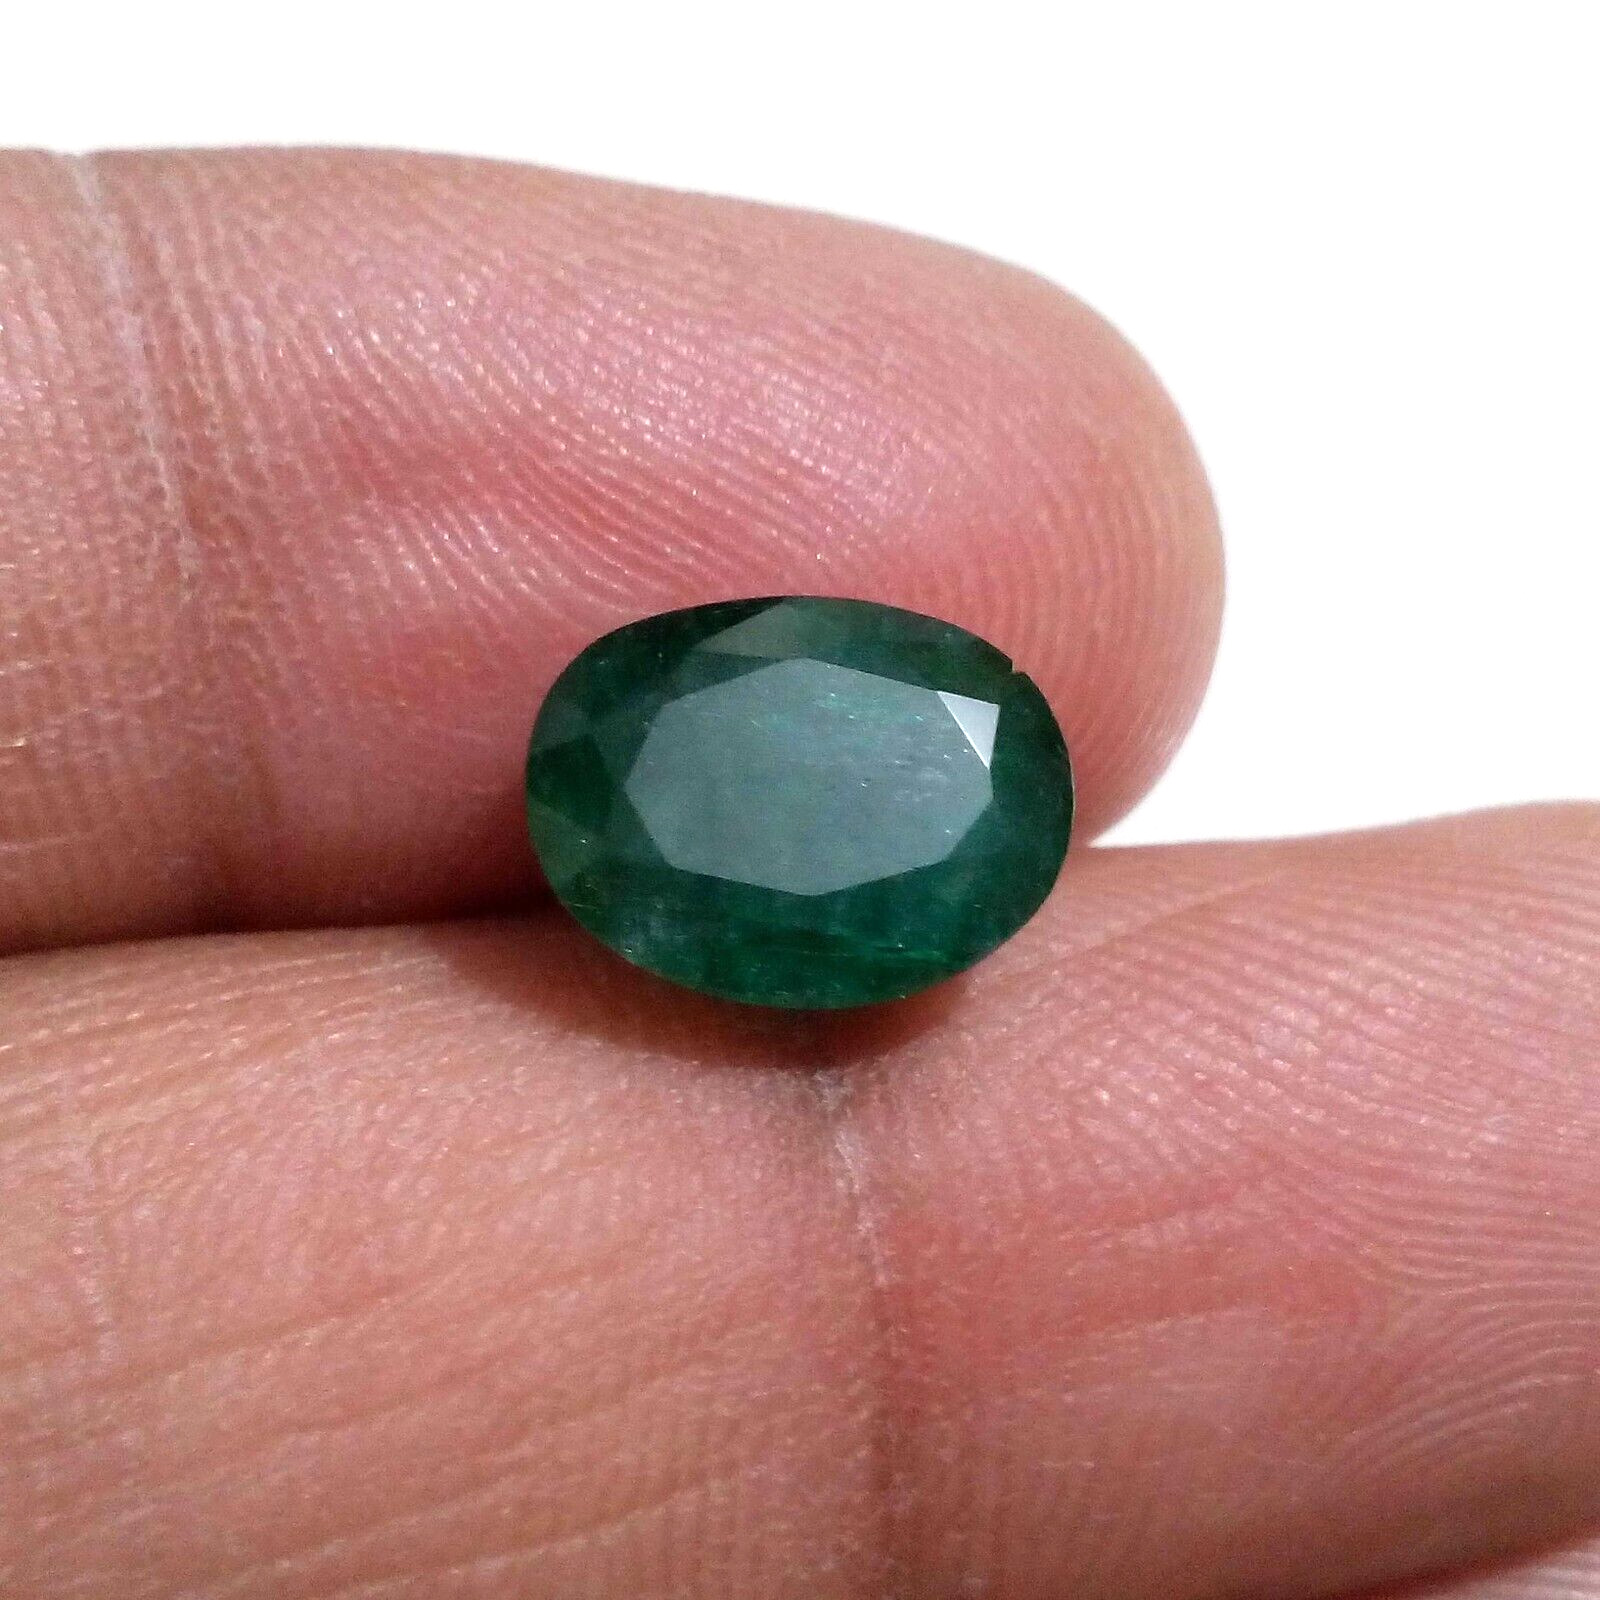 Outstanding Zambian Emerald Oval Shape 4.25 Crt Top Green Faceted Loose Gemstone